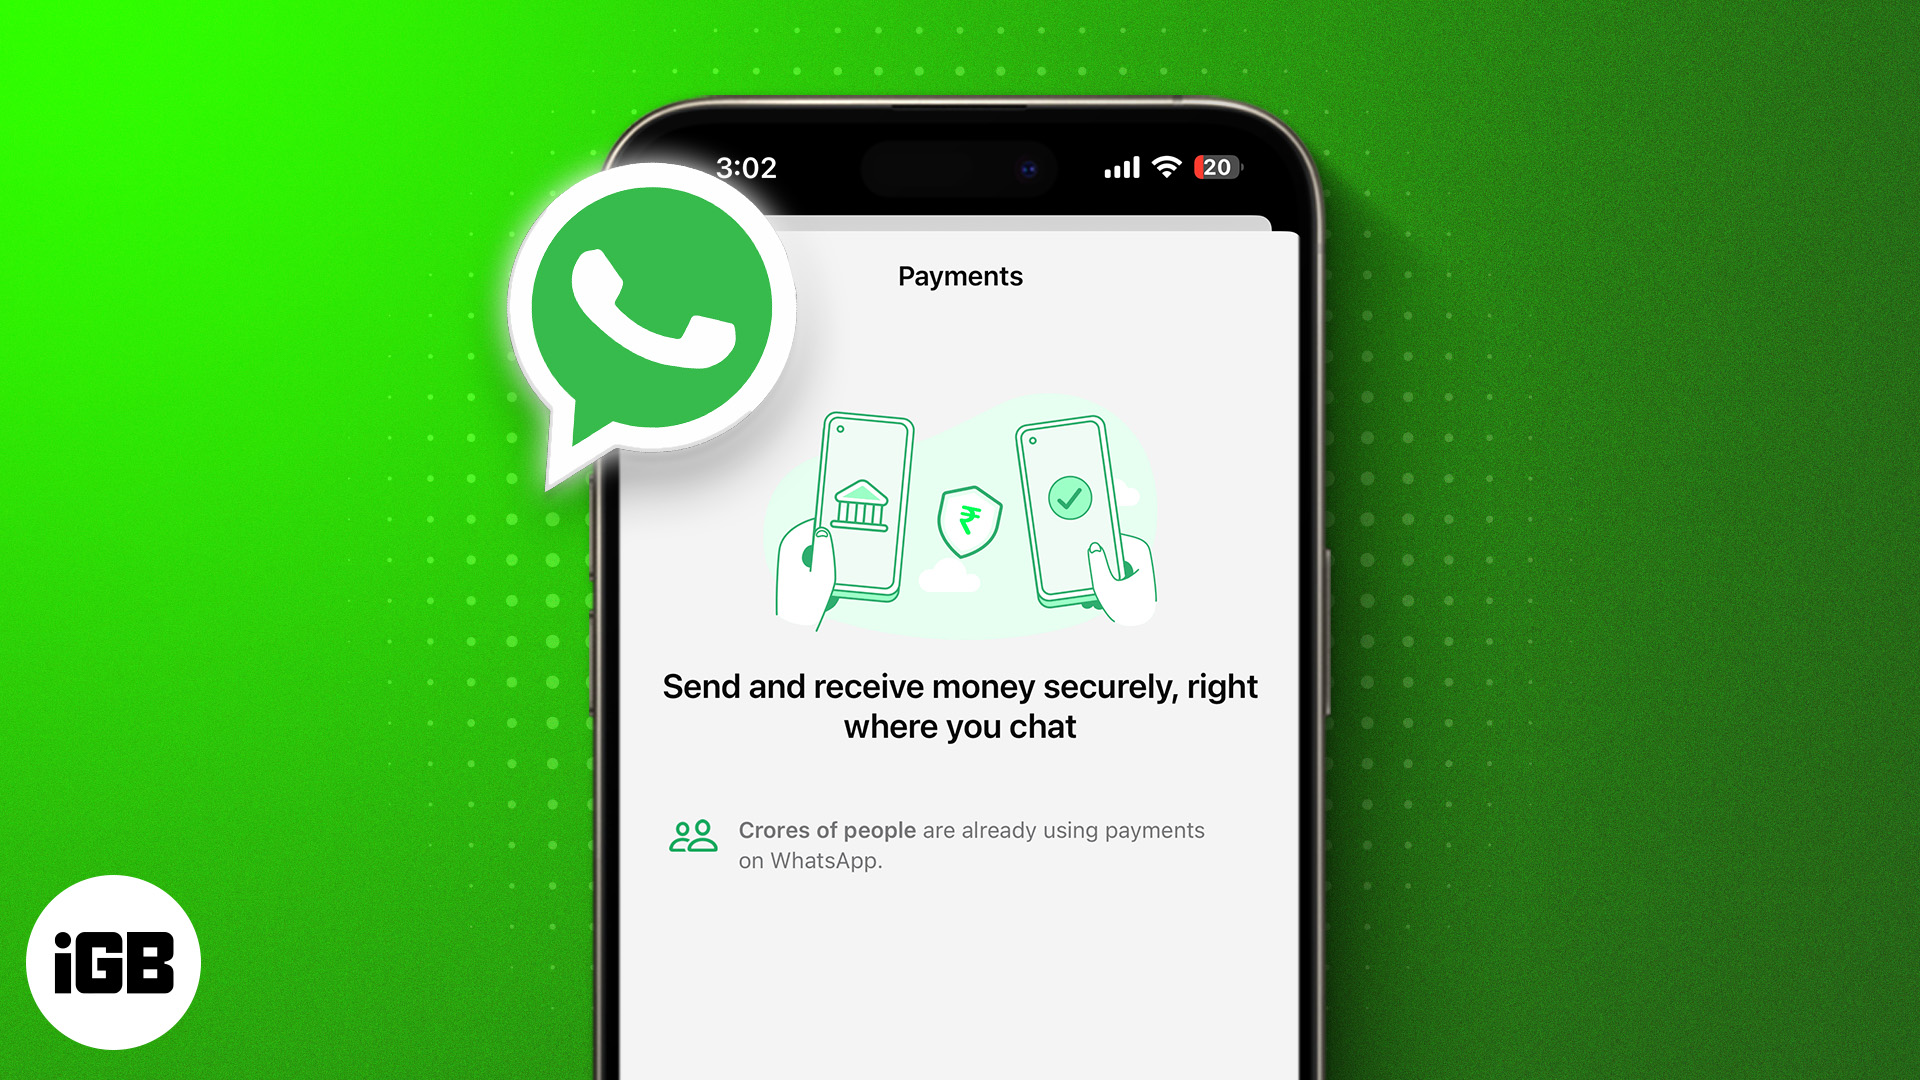 WhatsApp Payments on iPhone: How to set it up to send and receive money?